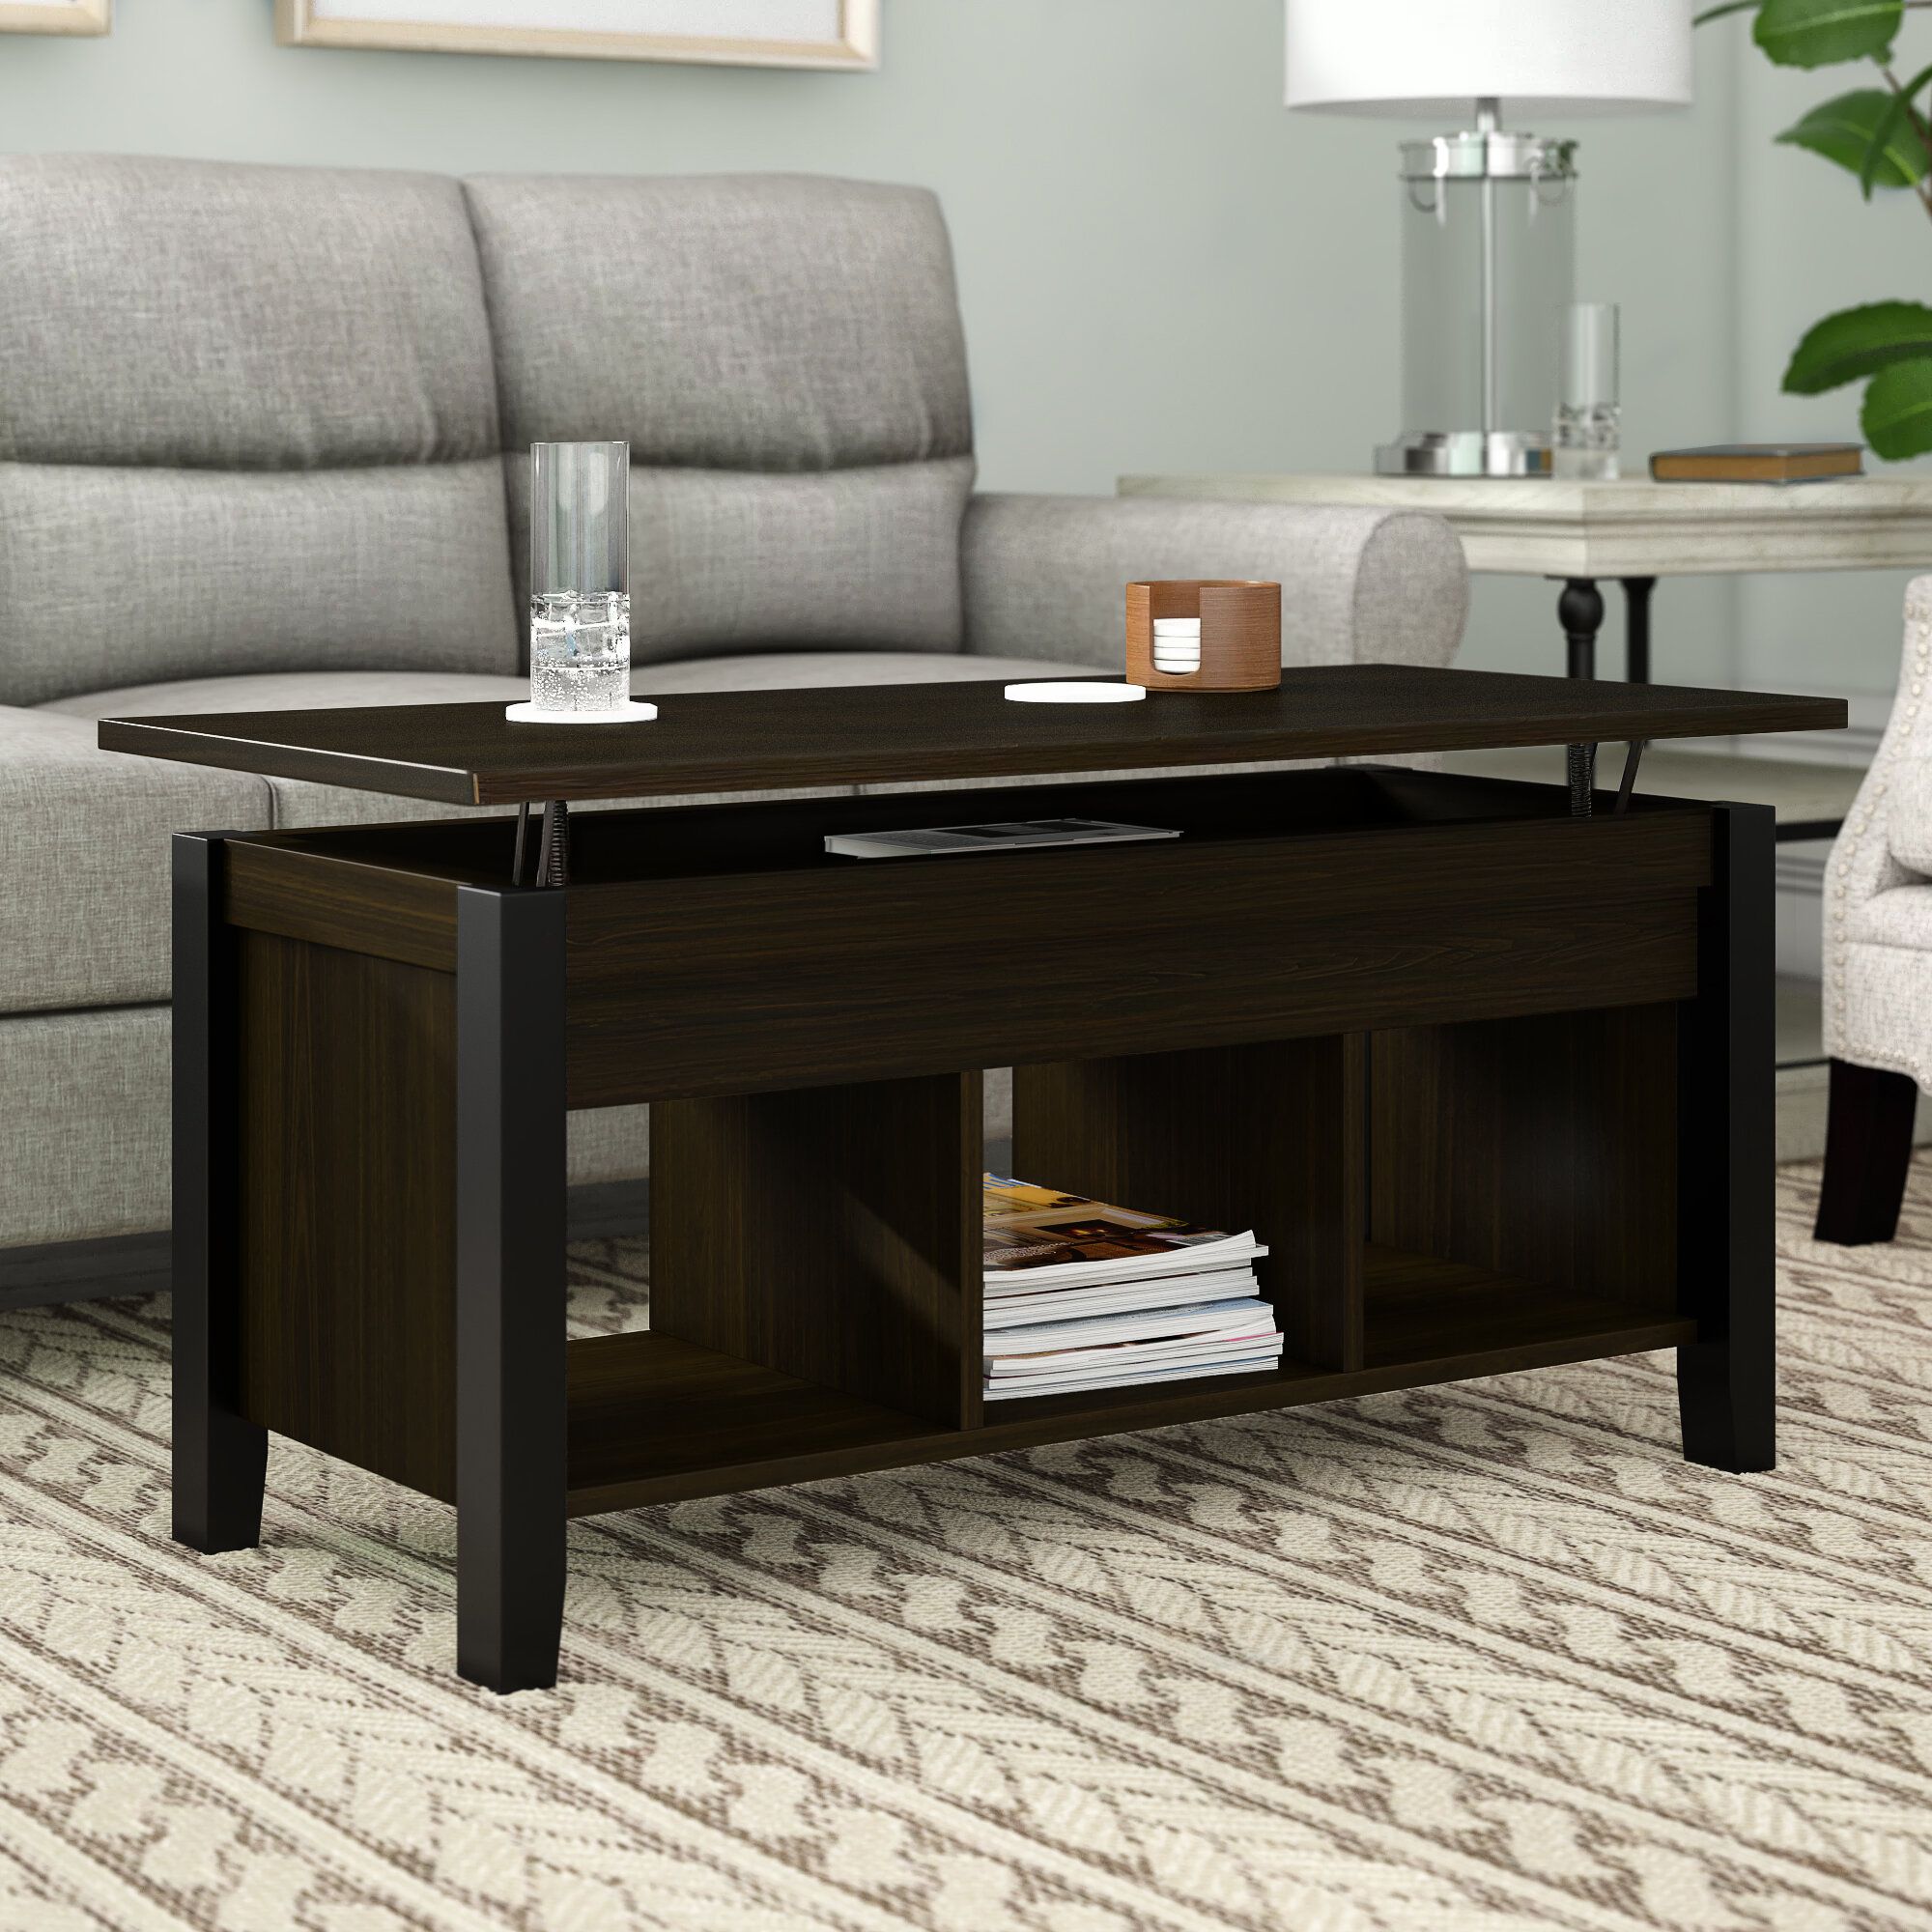 Winston Porter Cinderford Lift Top 4 Legs Coffee Table With Storage &  Reviews | Wayfair Throughout Lift Top Storage Coffee Tables (View 14 of 15)